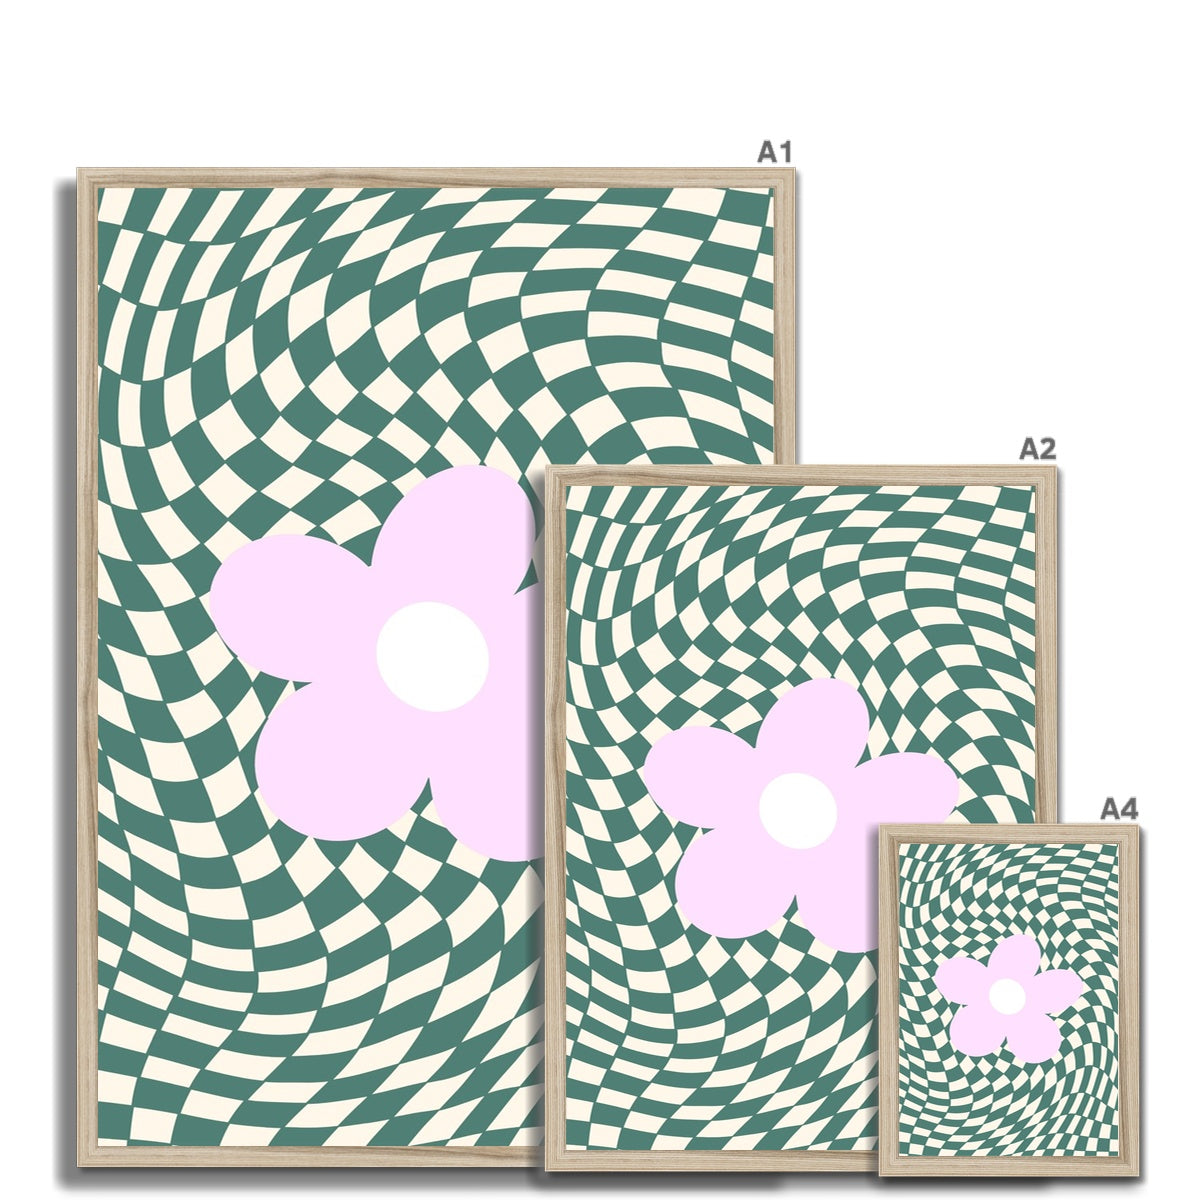 © les muses / Our Wavy Daisy collection features wall art with a psychedelic warped checker and retro daisy design. Danish pastel posters full of checkers and daisies in dreamy pastel shades of pink, green, blue and lilac. A funky floral print perfect for dorm and apartment decor.